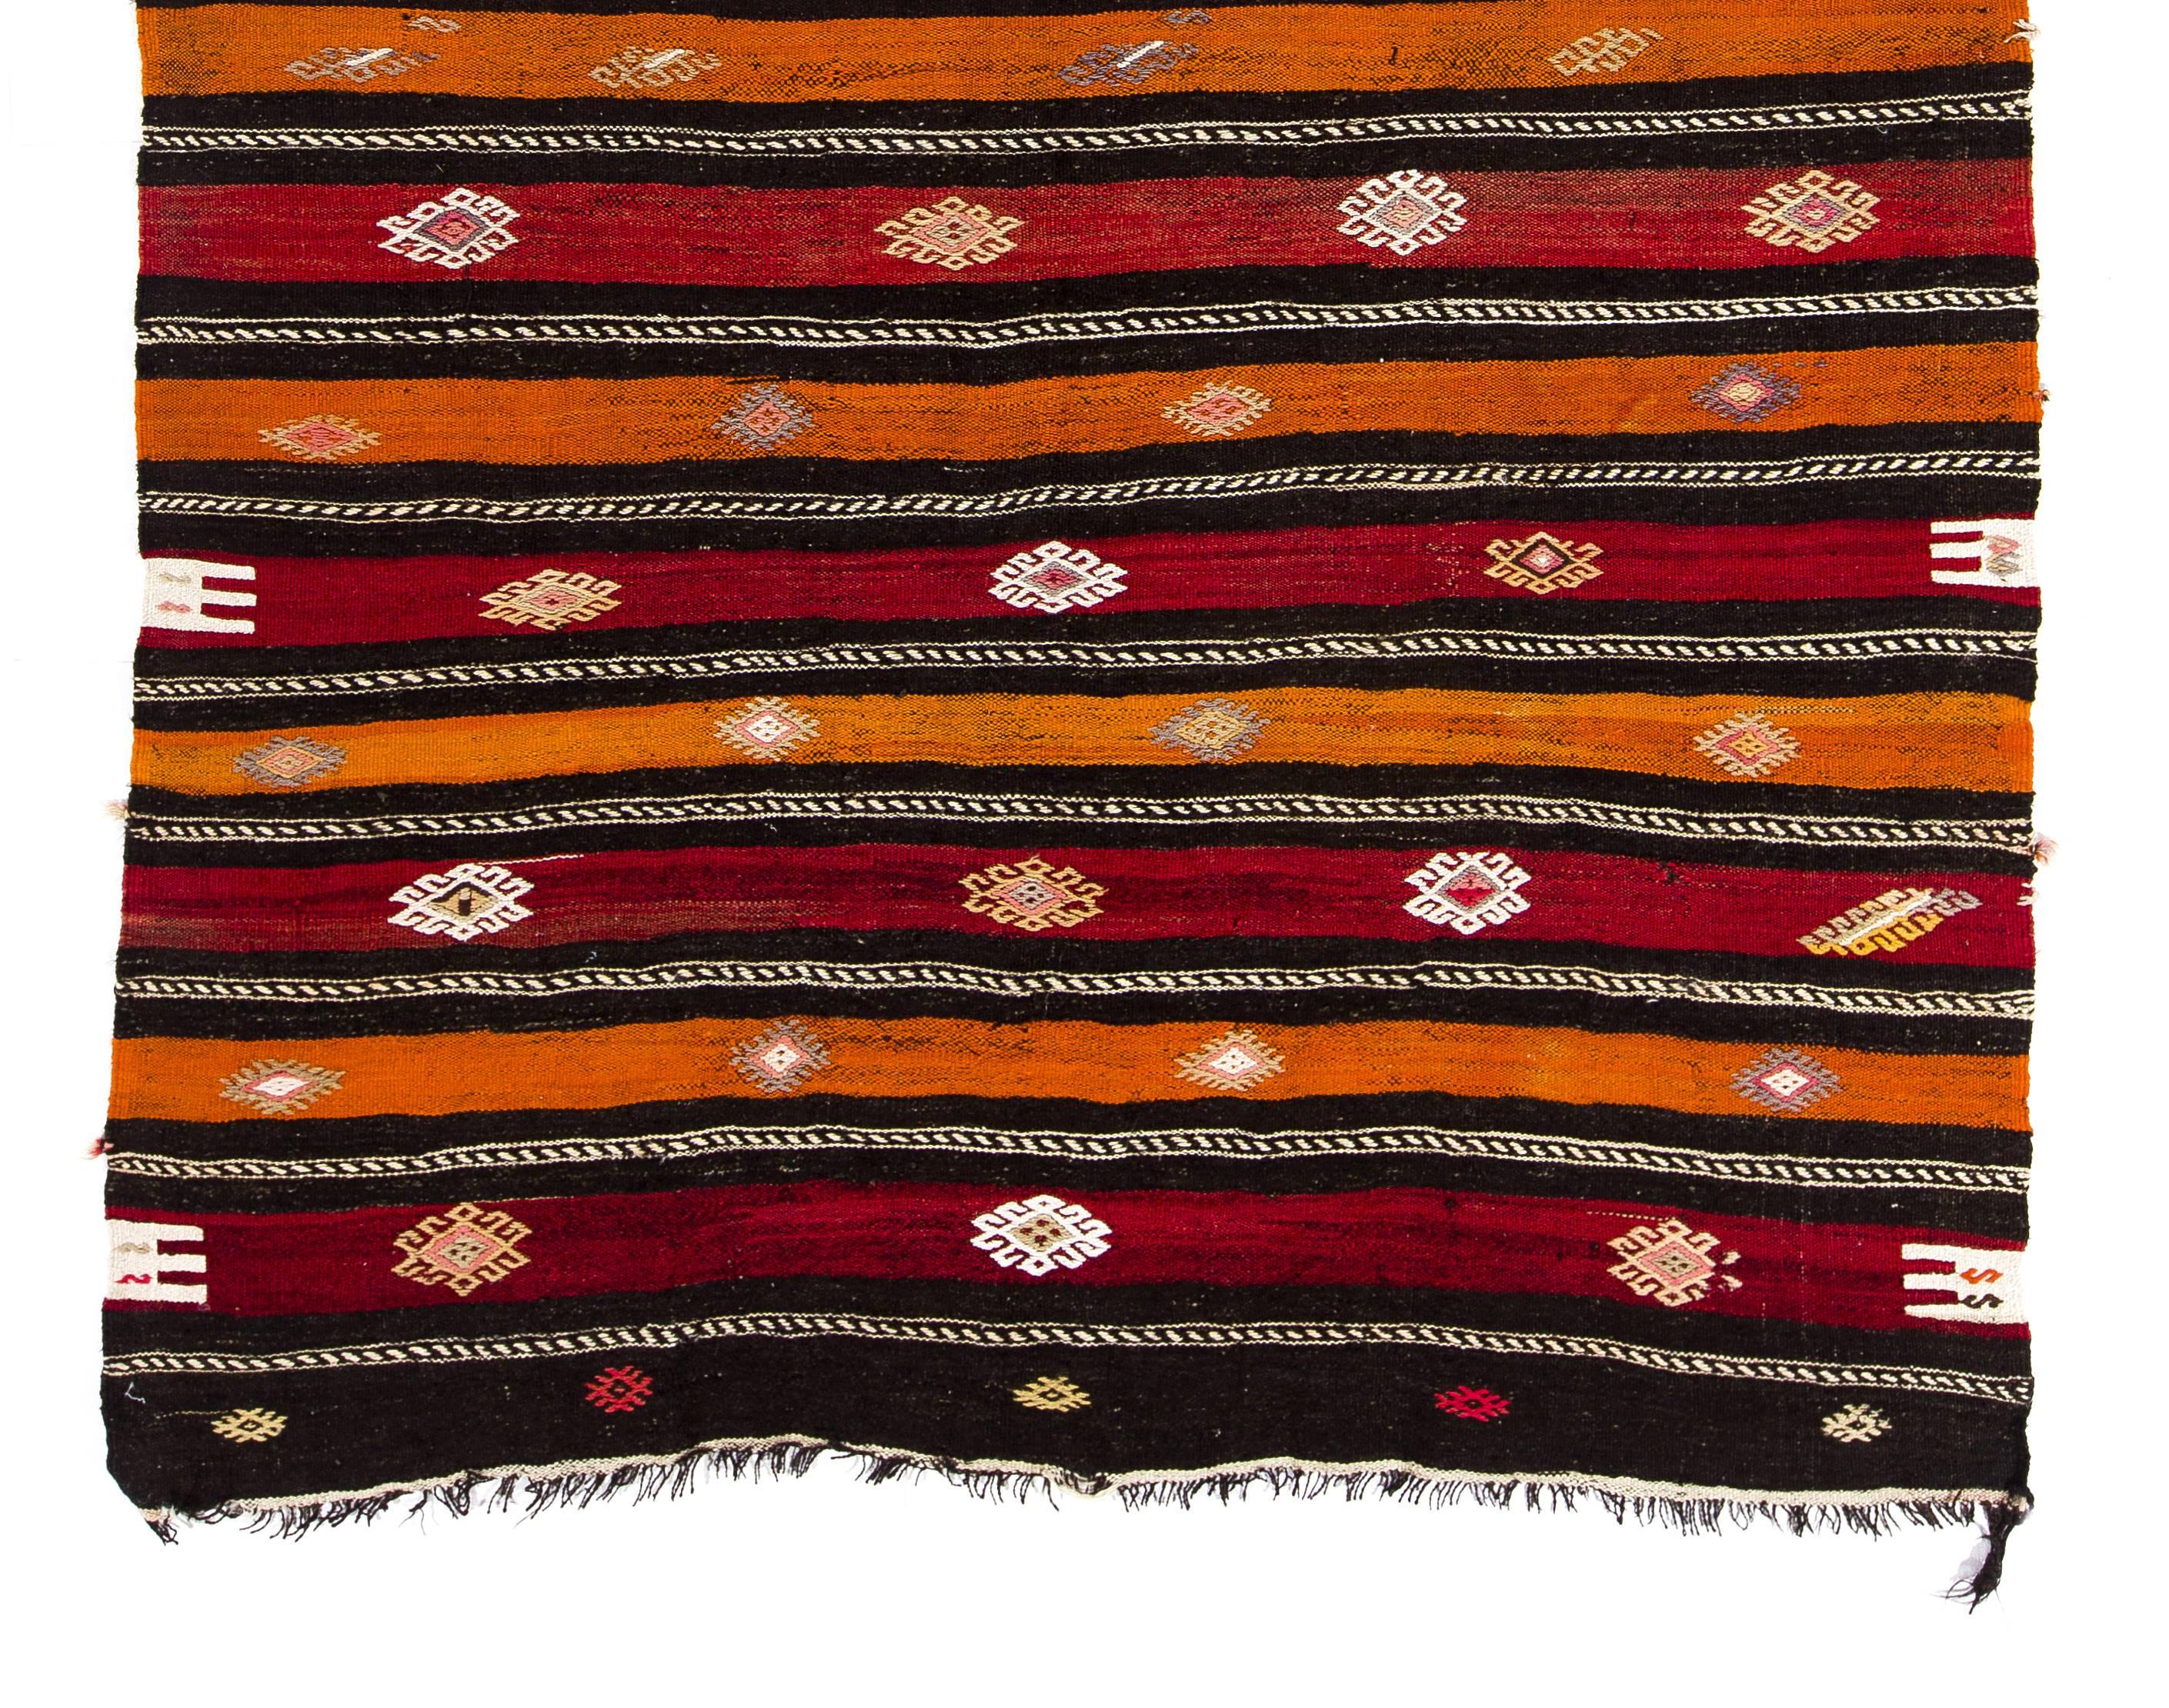 This authentic handwoven flat-weave (Kilim) from Central Turkey was made by Nomads to be used as a floor covering in their tents or summer houses circa mid-20th century. It is made of beautiful natural dyed red, terracotta, orange and undyed black